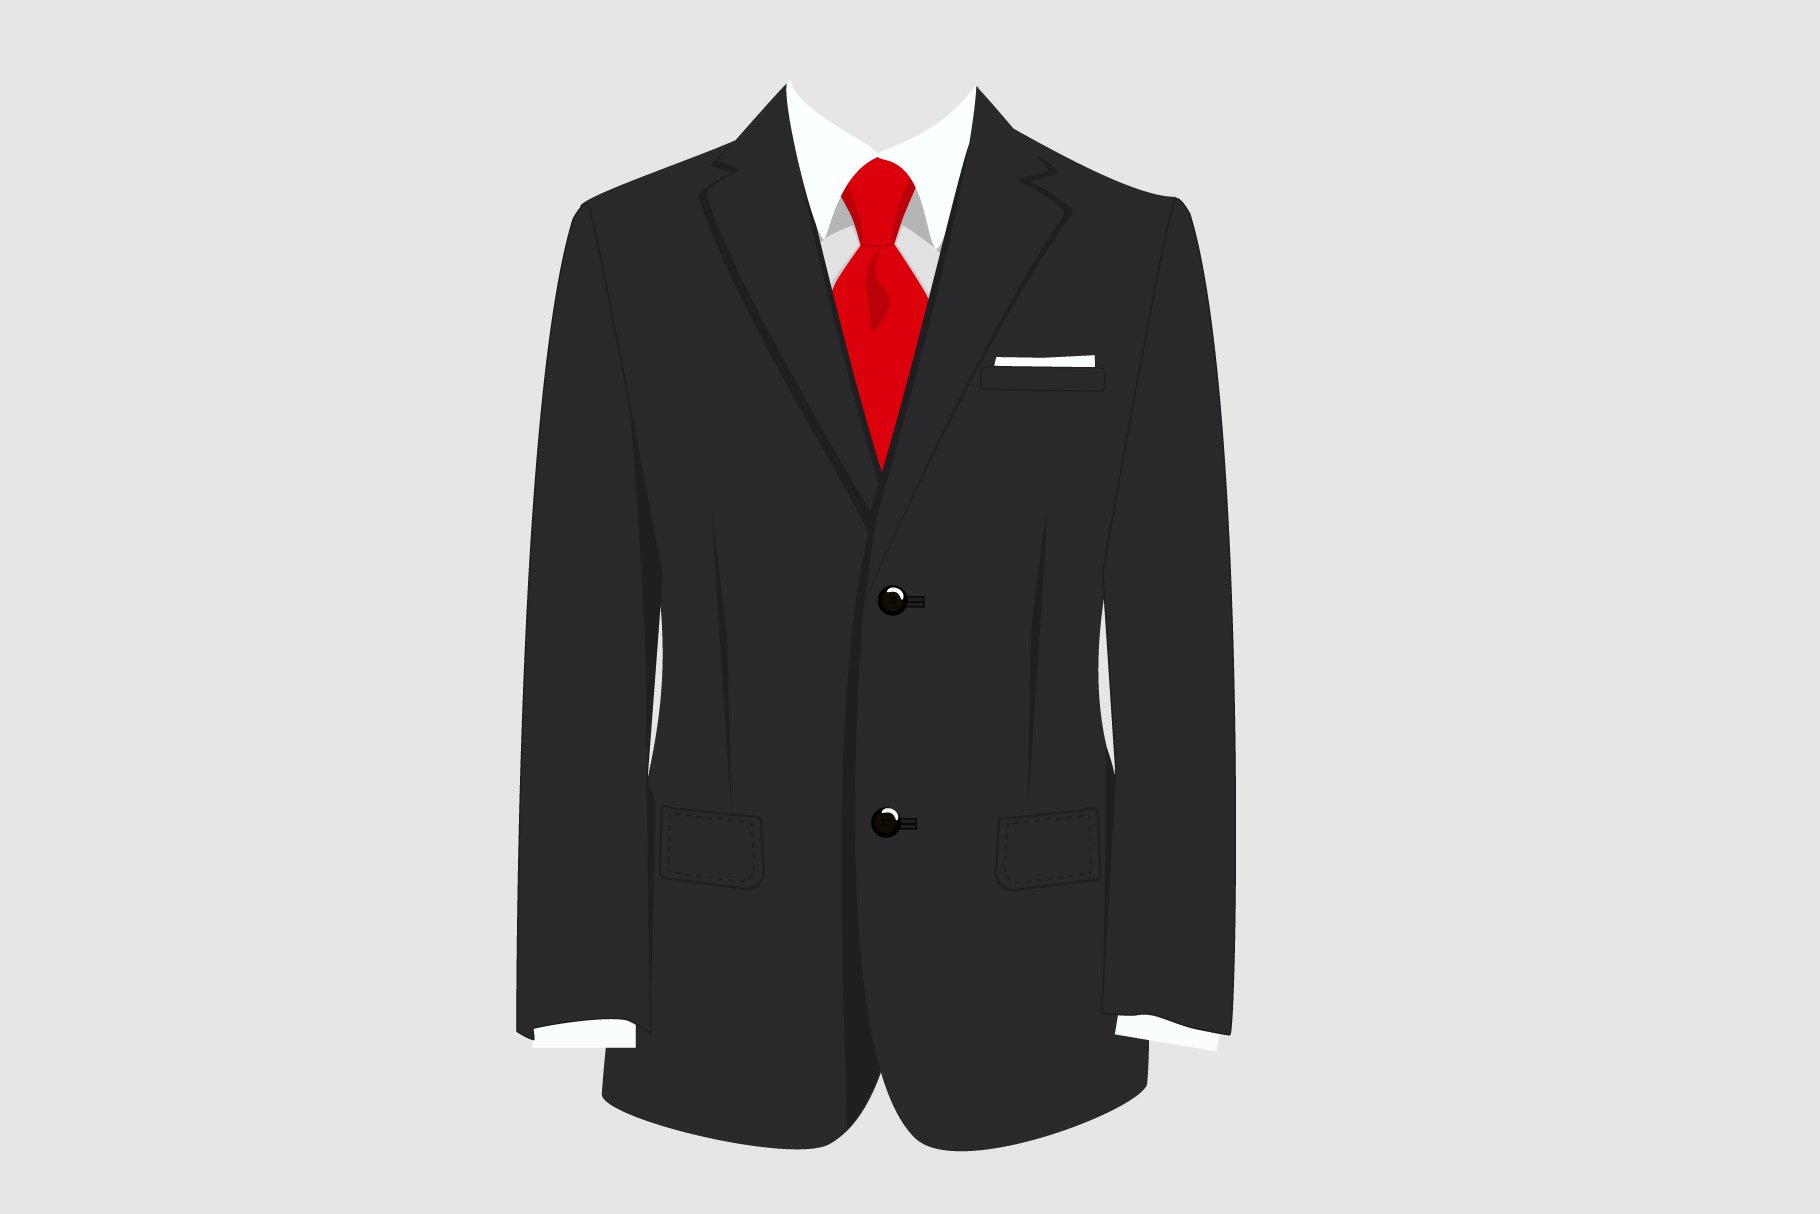 Black man suit with red tie cover image.